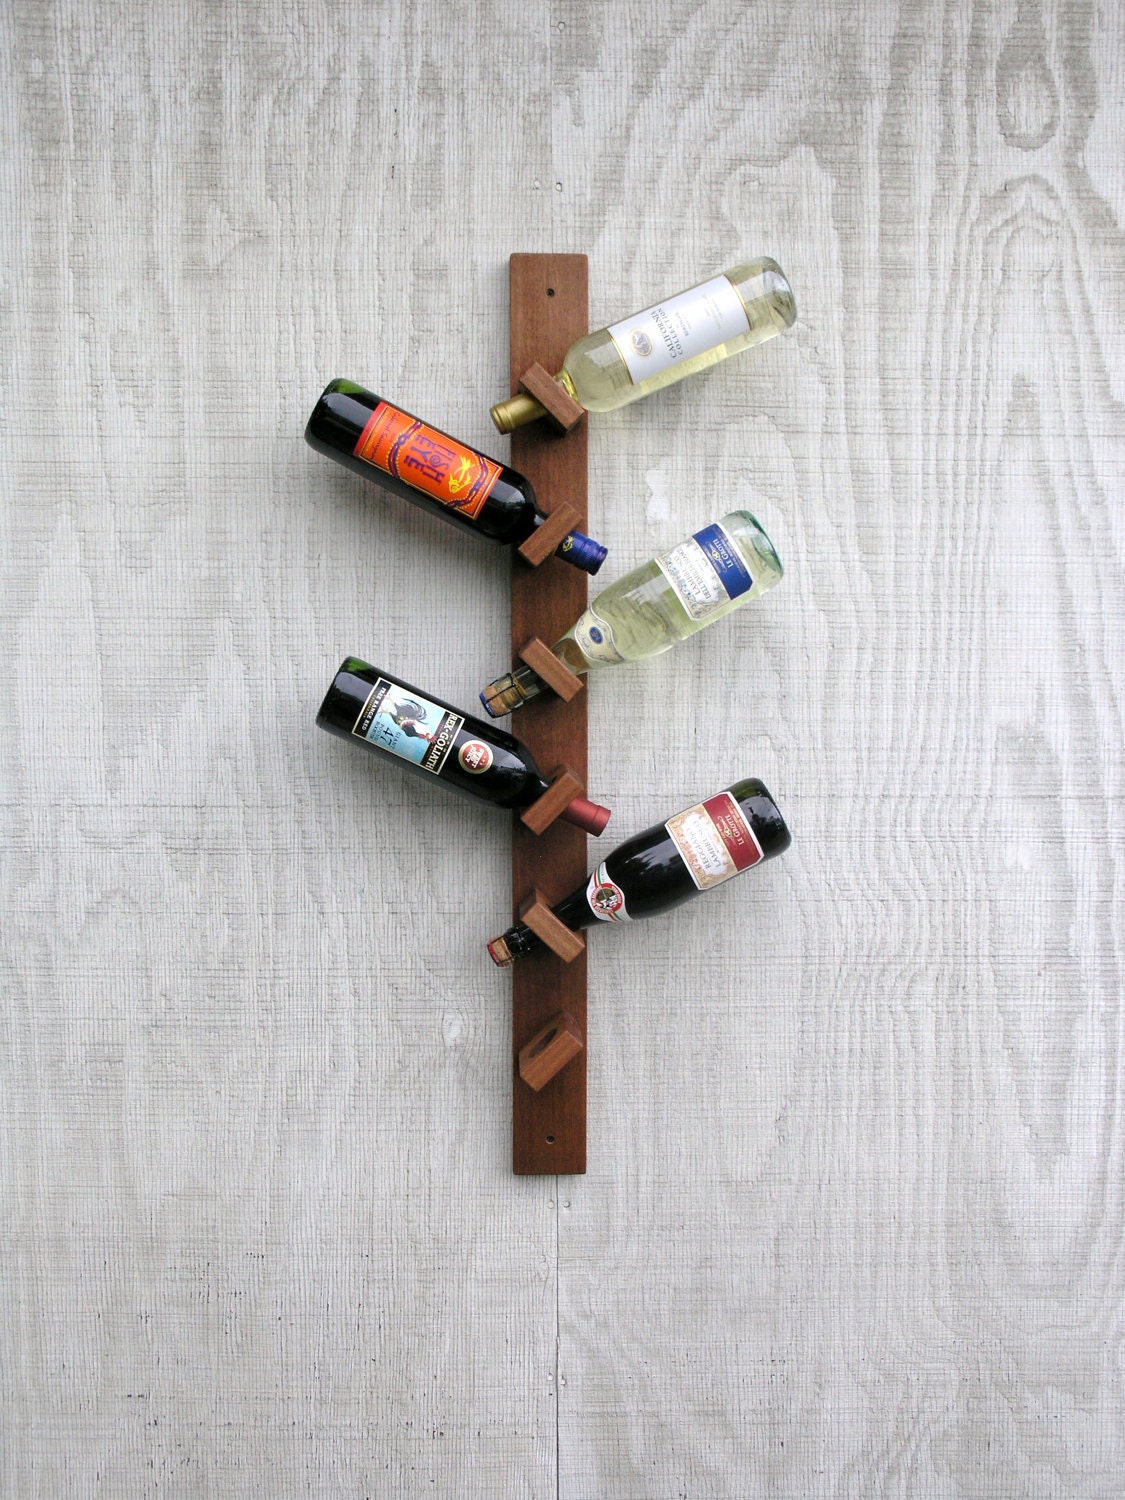 Fathers Day Gift - Modern Rustic Hanging Wine Rack - Exotic African Makore wood - 6 bottle wine rack - ReclaimedTrends